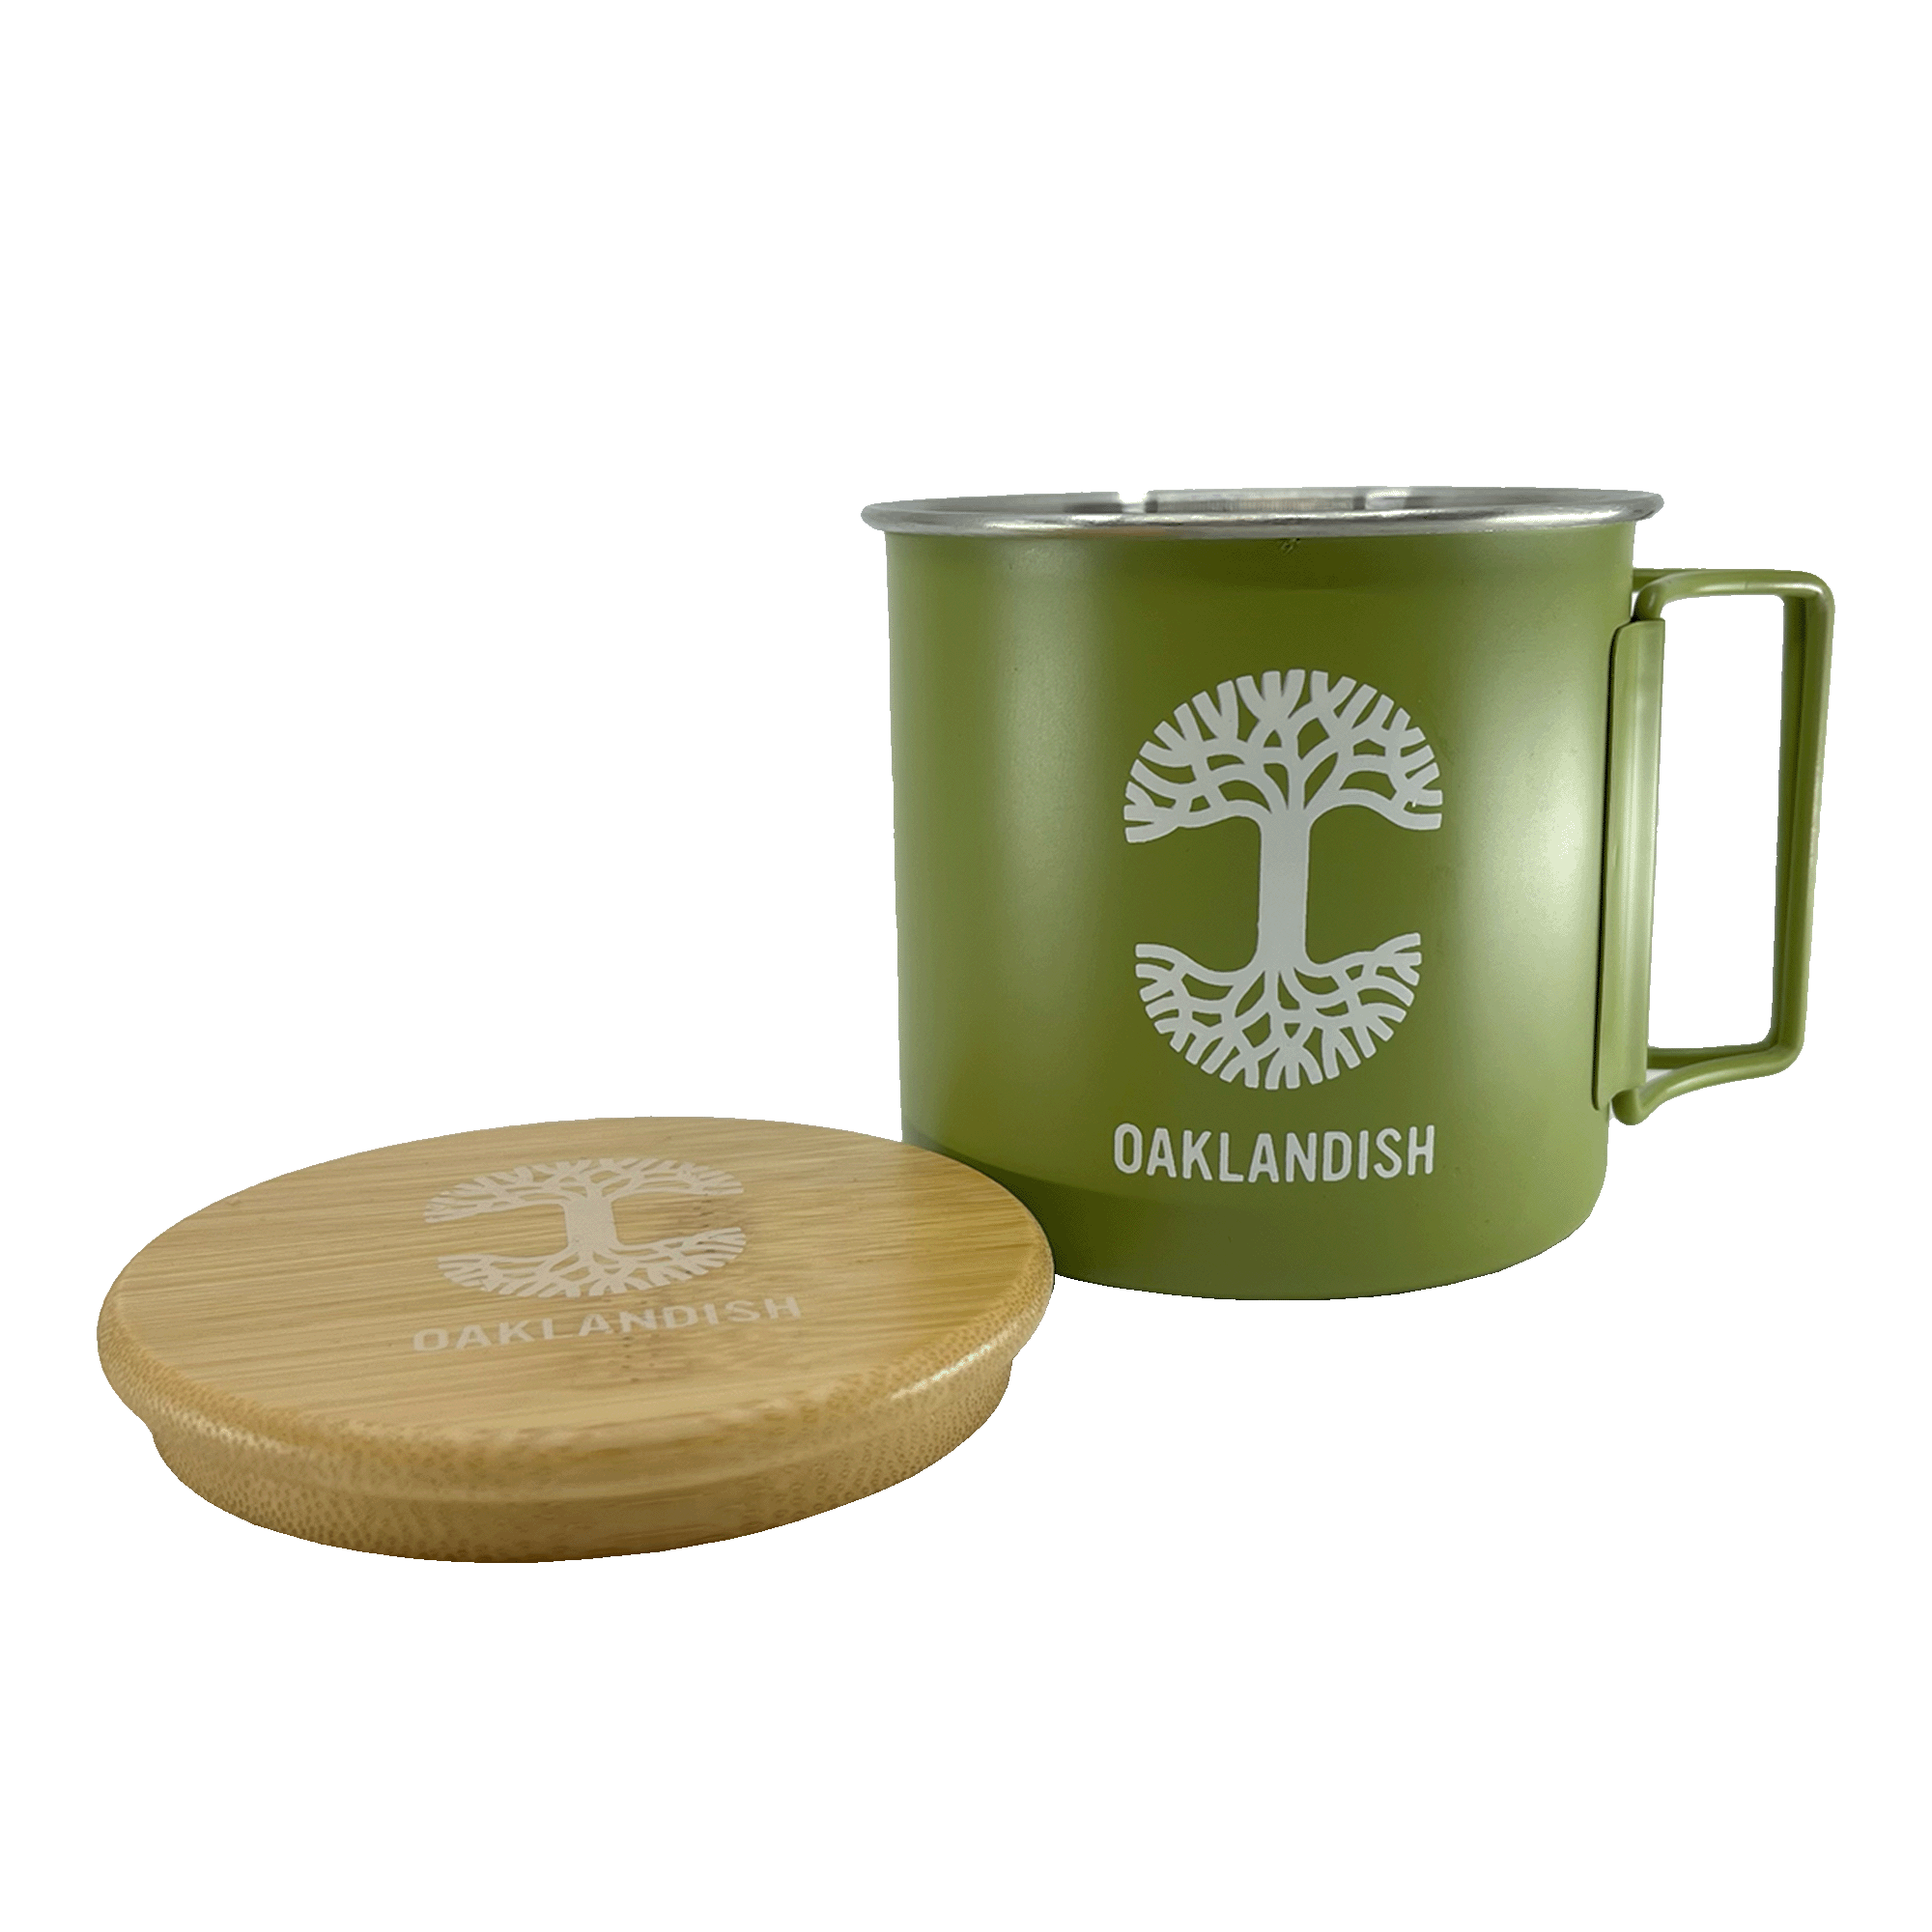 Green stainless steel camp mug with collapsable handles, large white Oaklandish tree logo, and wordmark and bamboo lid with Oaklandish logos sitting beside it.